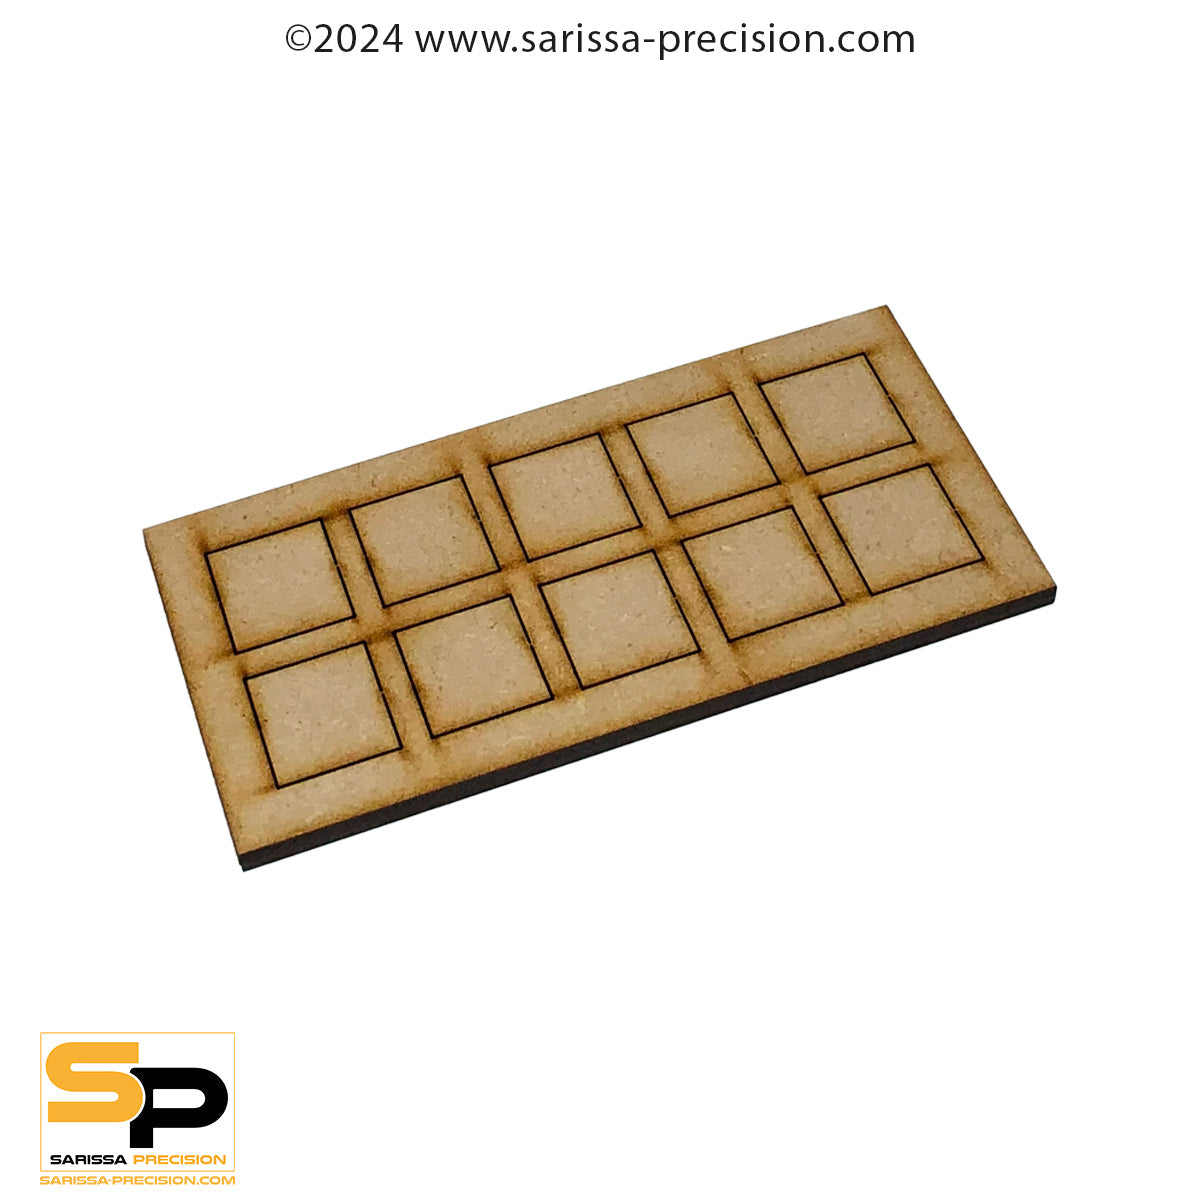 12 x 10 25x25mm Conversion Tray for 20x20mm bases